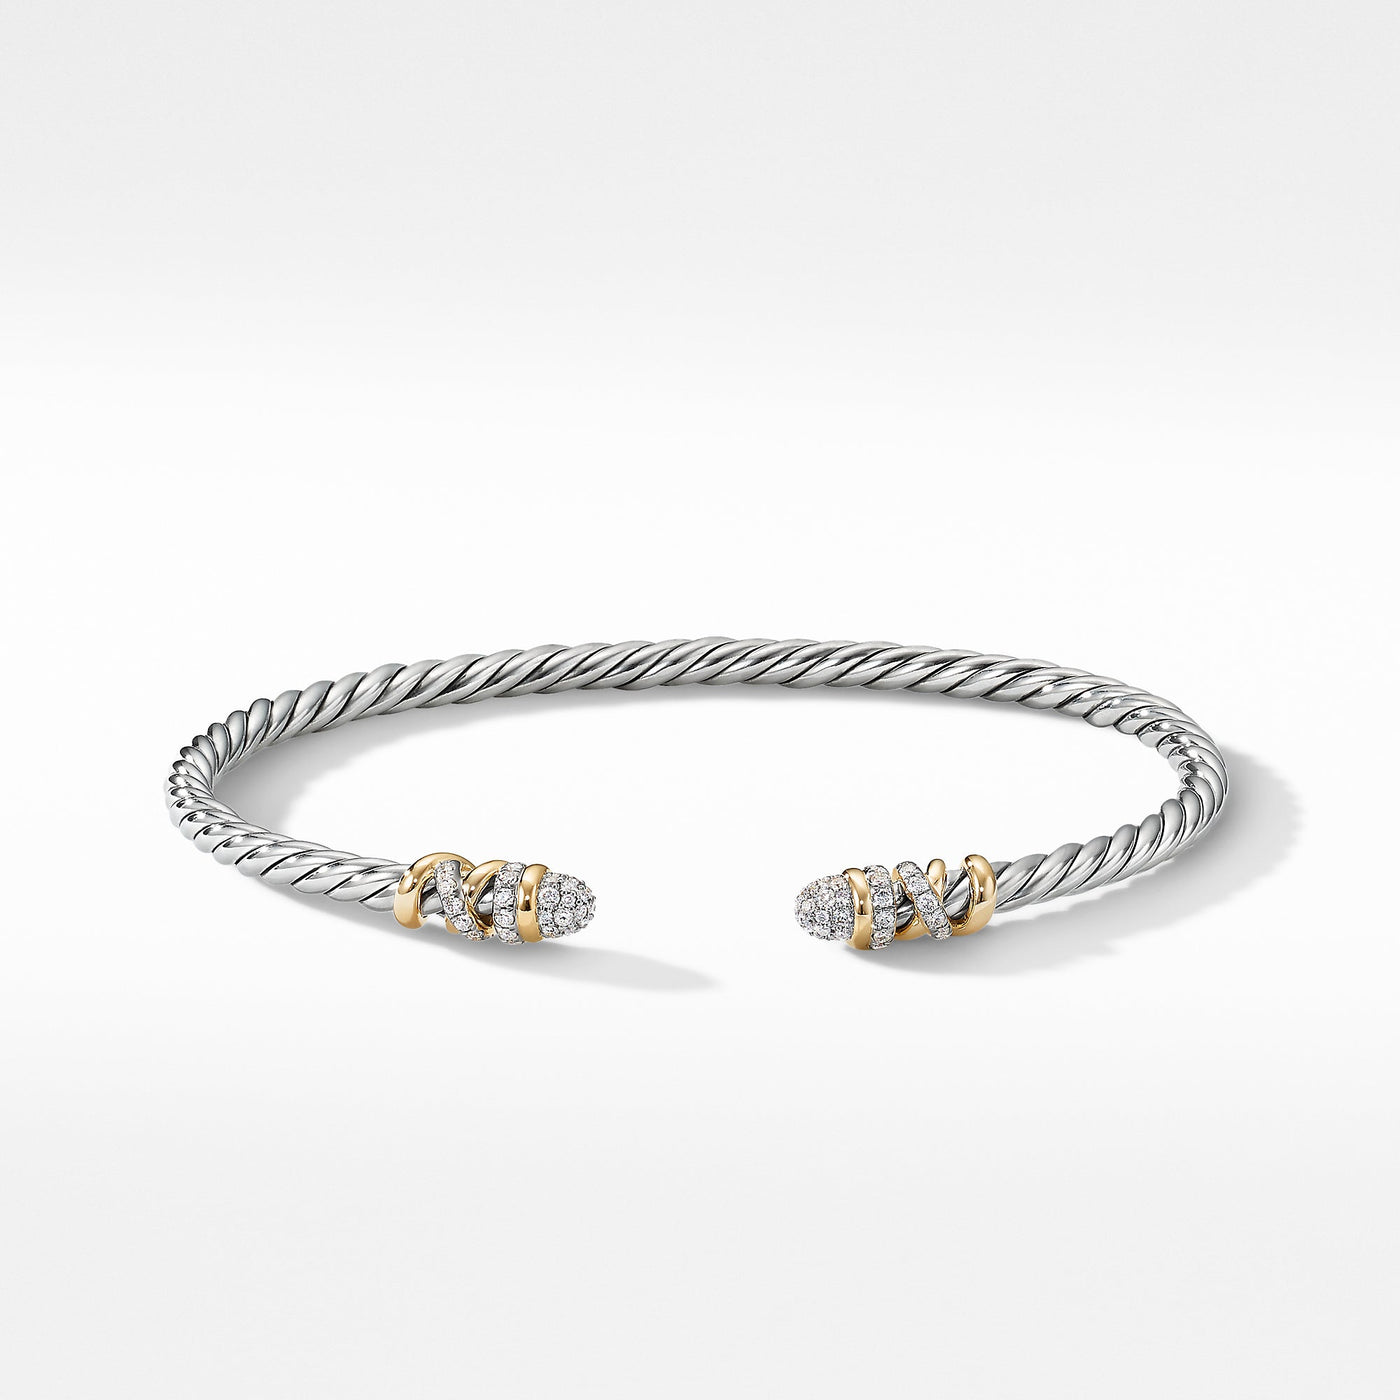 Petite Helena Classic Cable Bracelet in Sterling Silver with 18K Yellow Gold and Diamonds\, 3mm